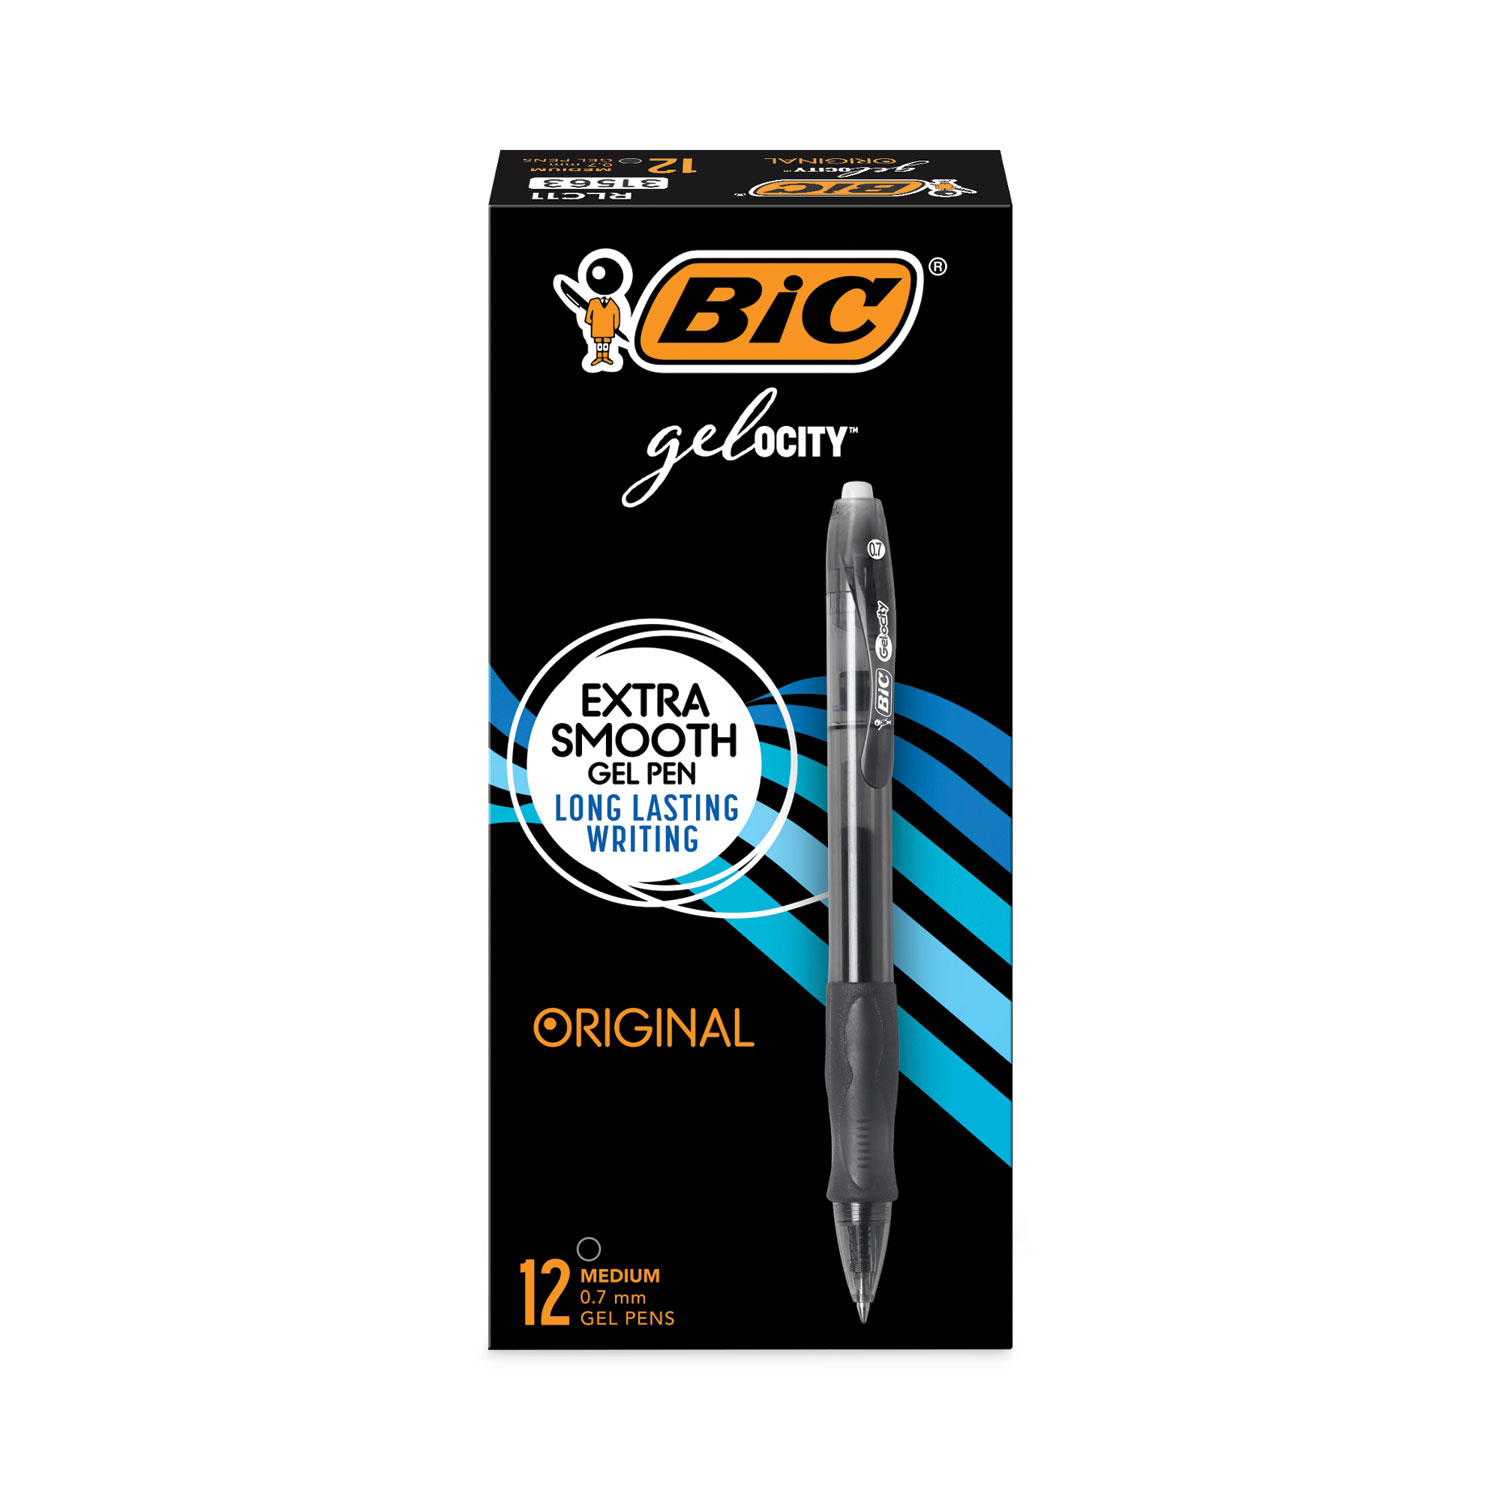 The Bic Cristal Is (Arguably) The Greatest Pen Ever Made. — The